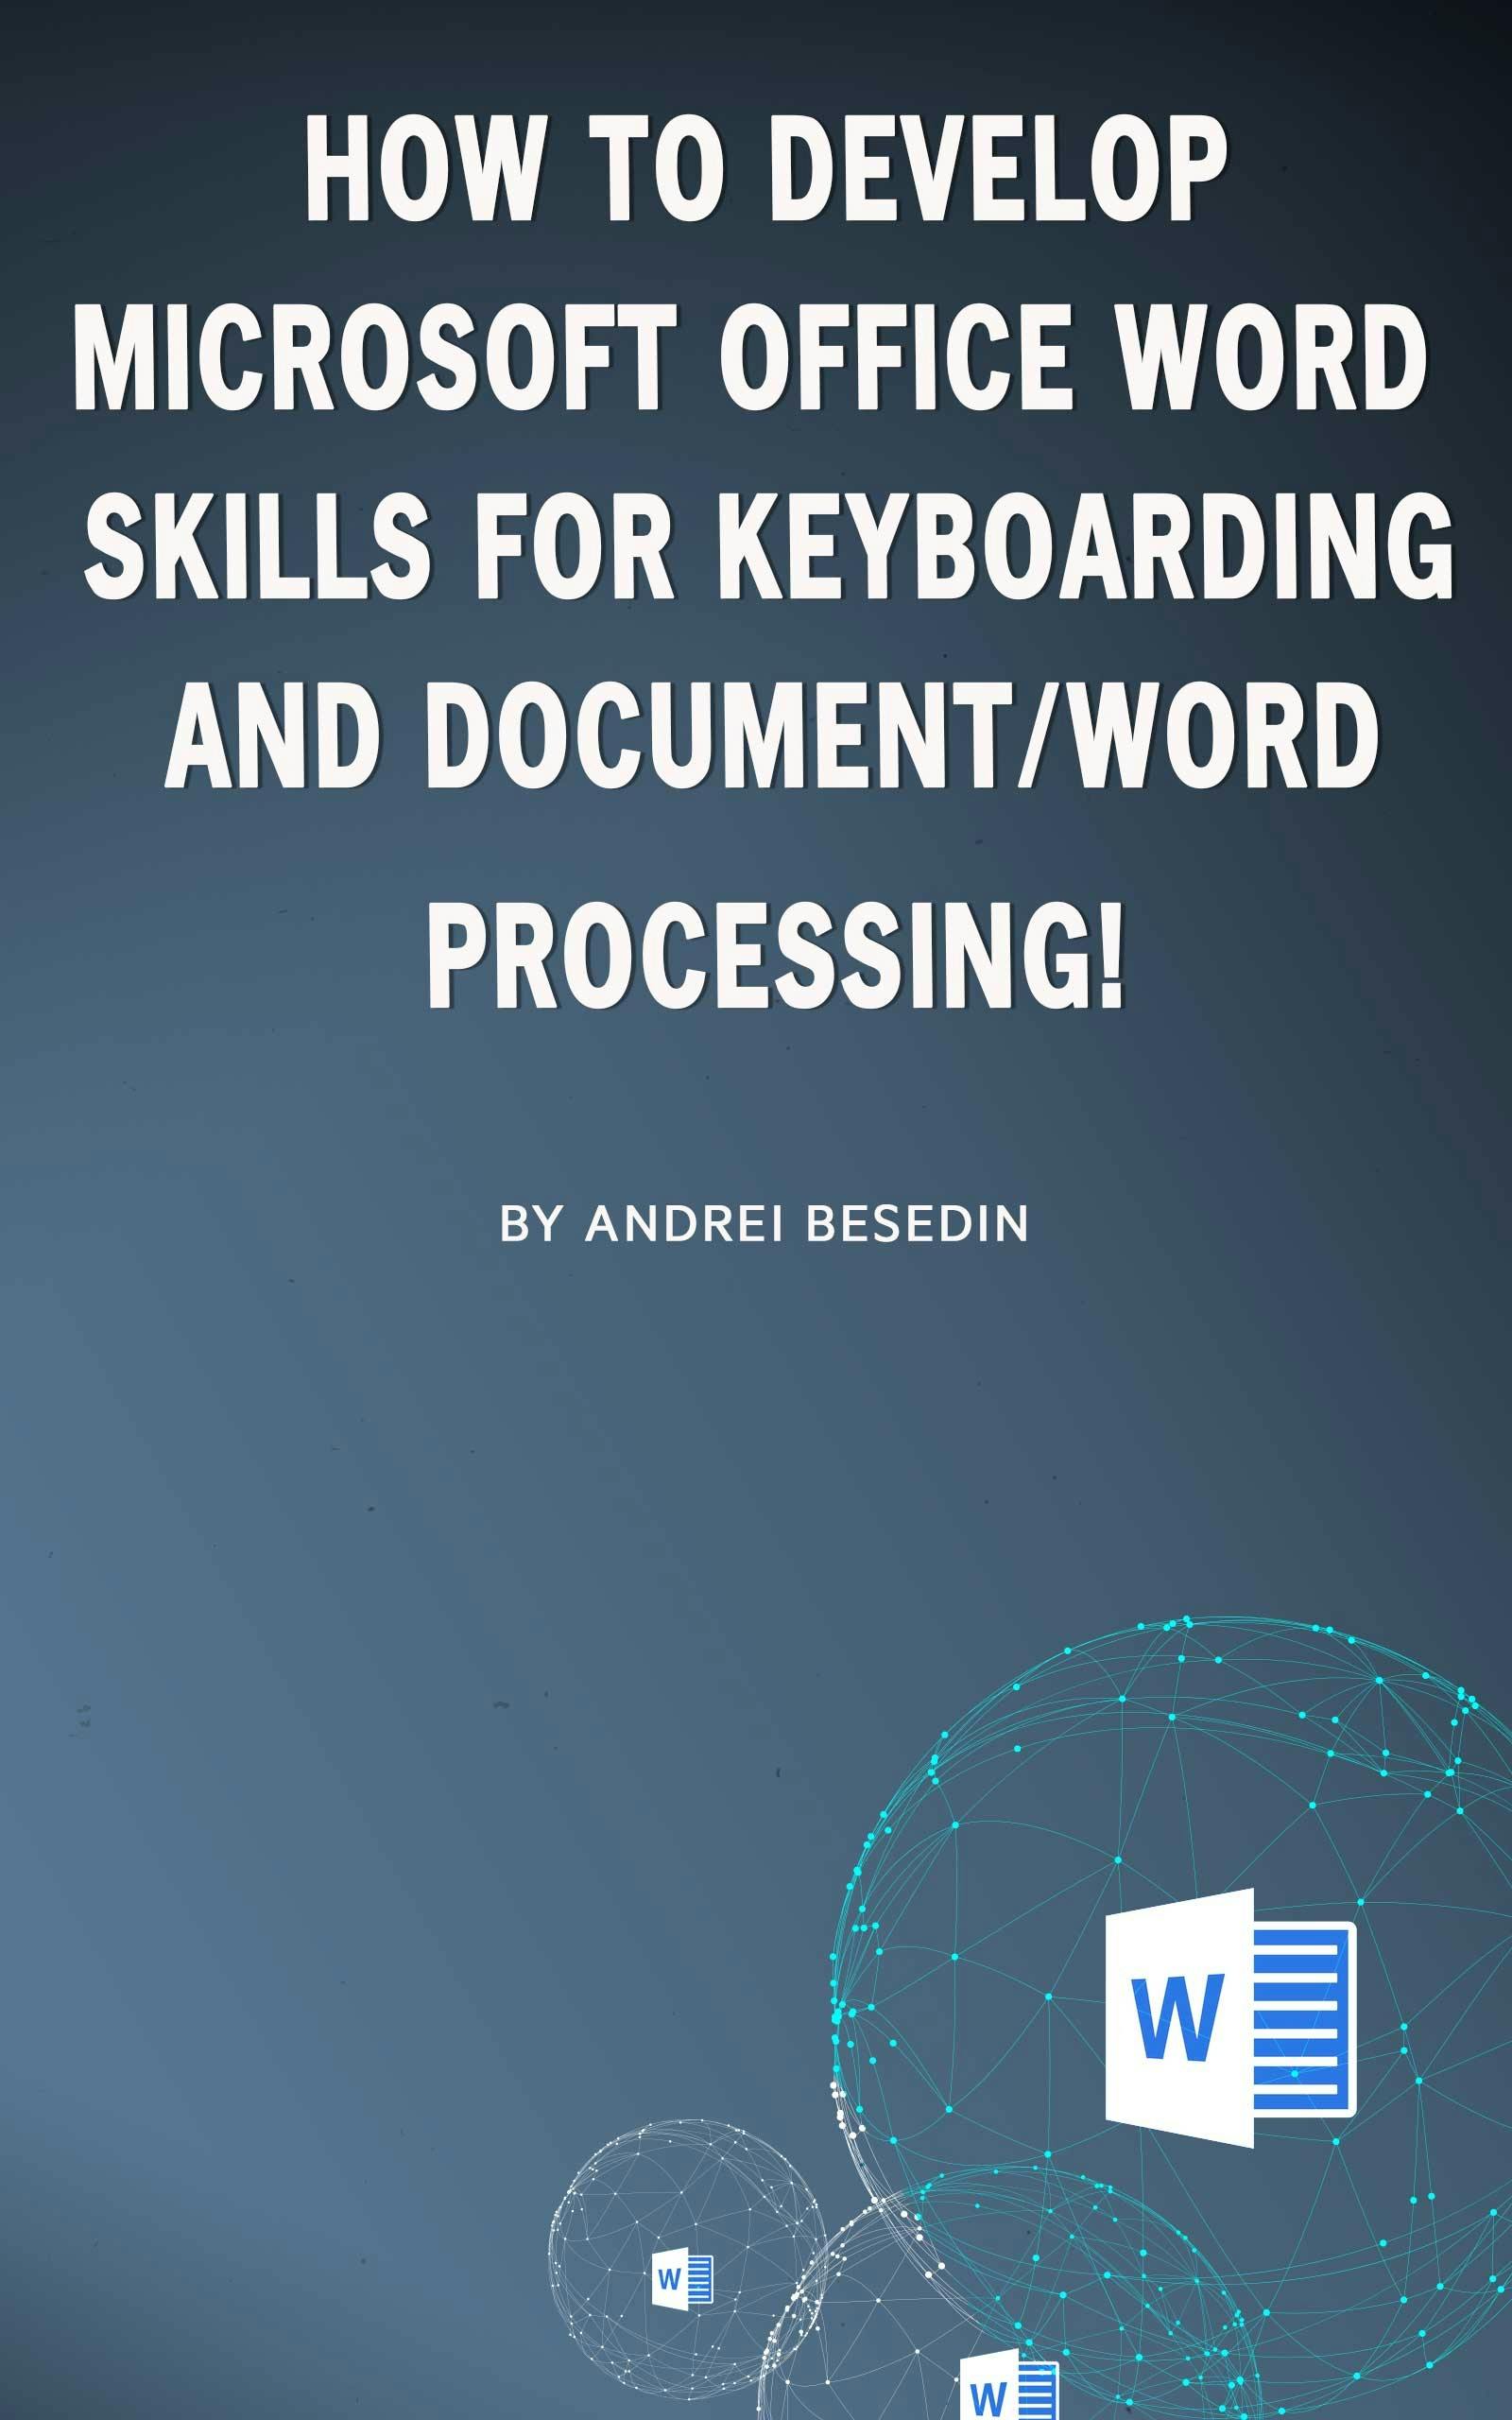 How to Develop Microsoft Office Word Skills For Keyboarding And Document/Word Processing! - Andrei Besedin